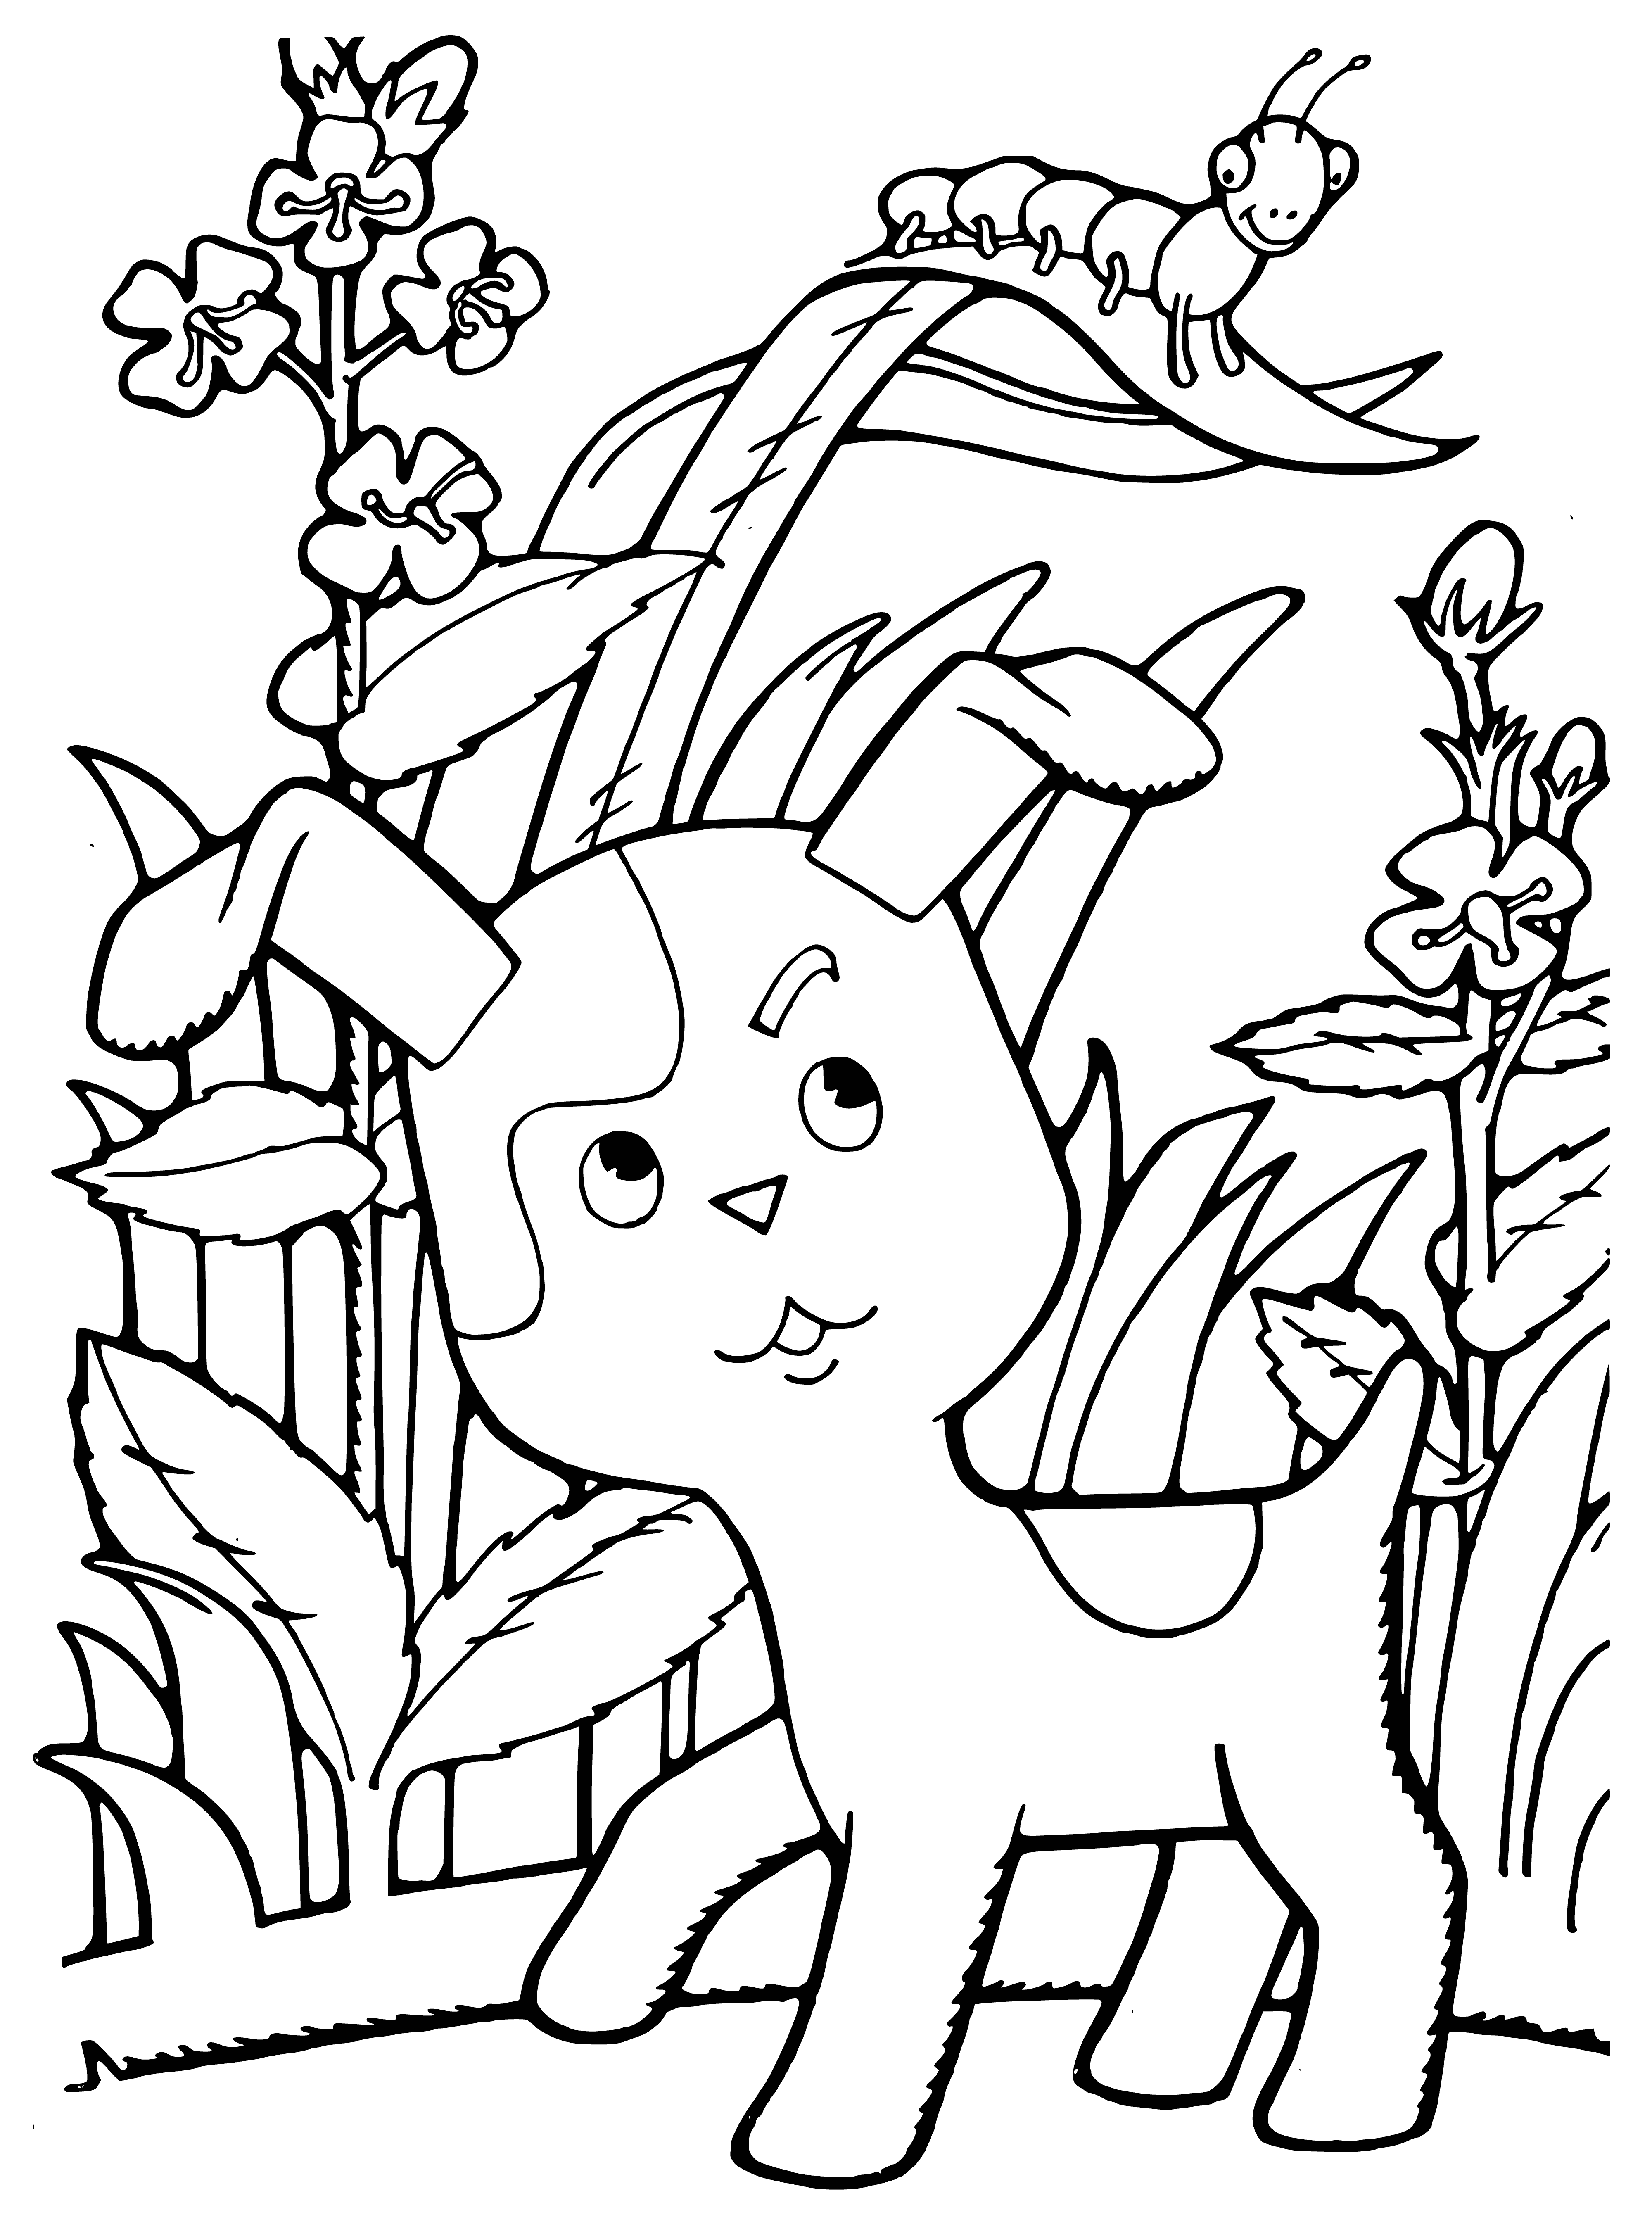 coloring page: Kitten in center surrounded by energetic puppies in playful scene. Cute and fun coloring page.